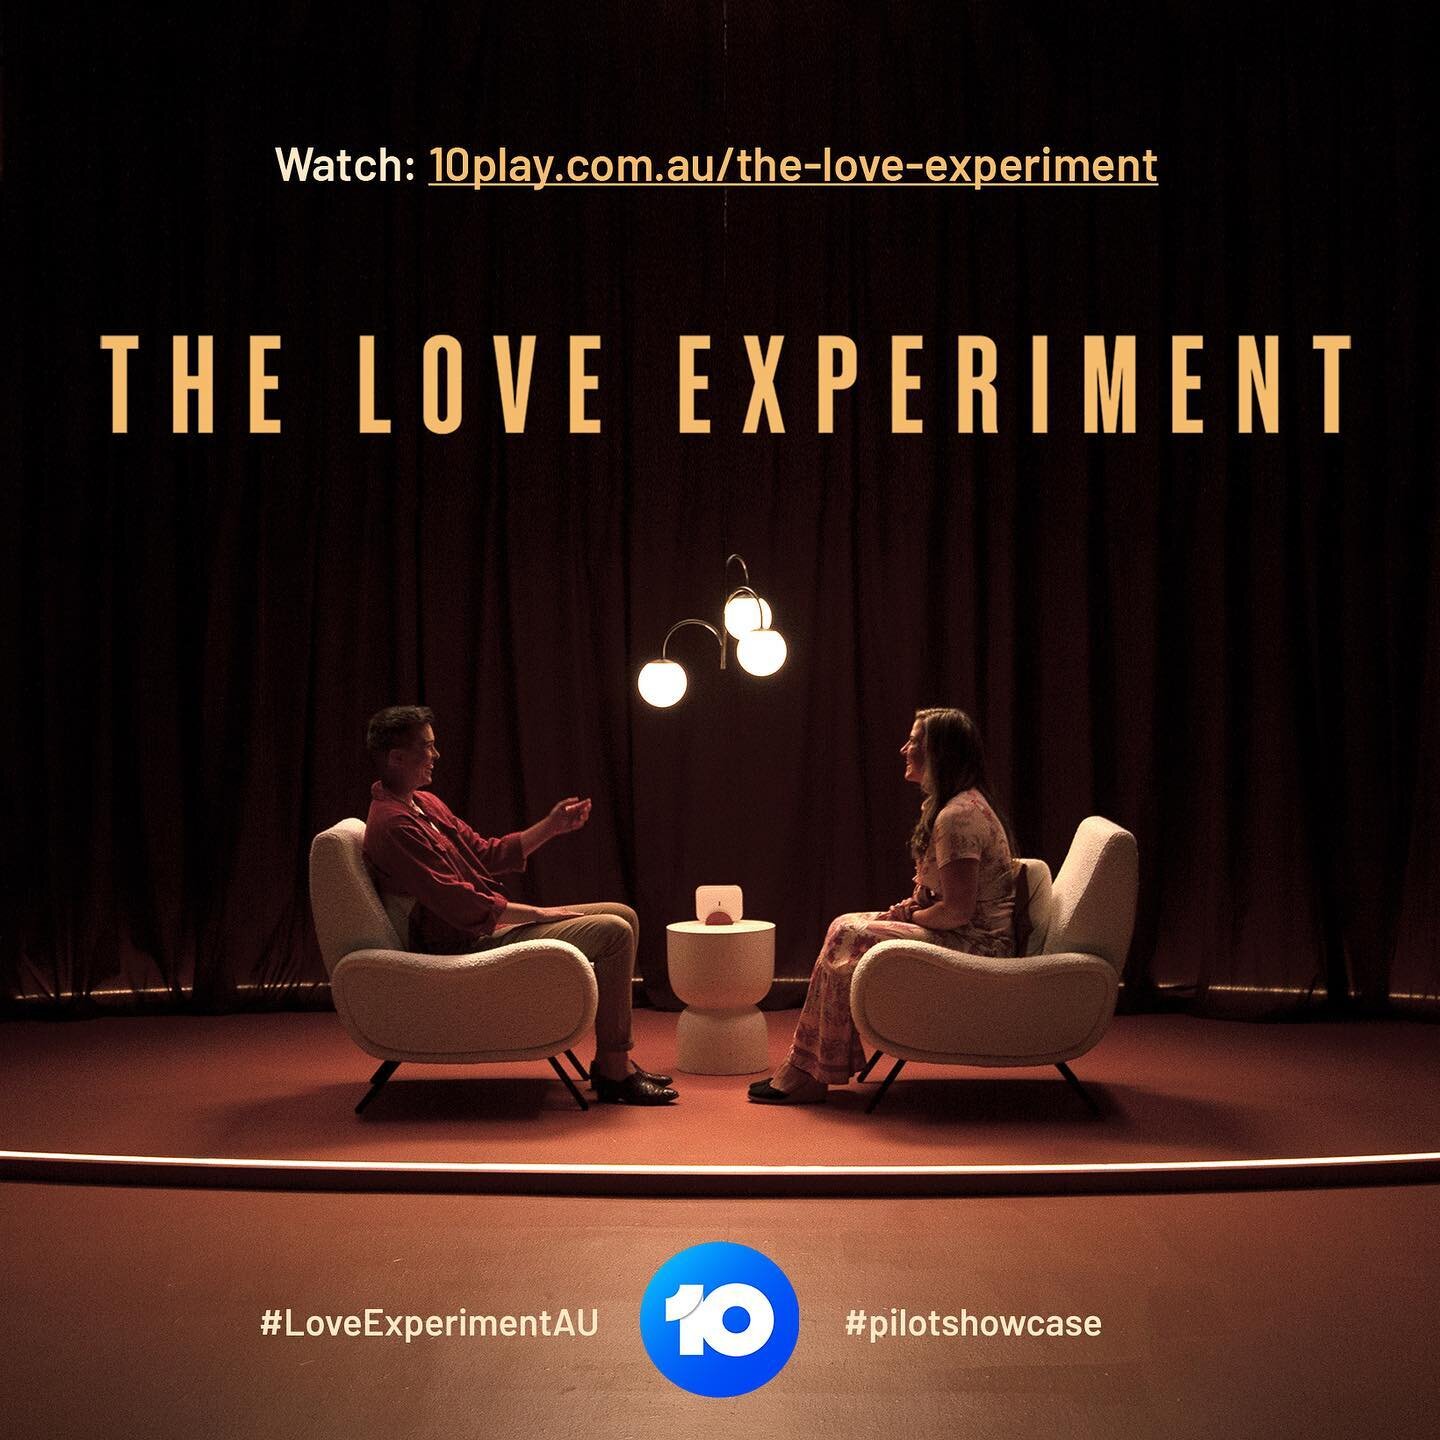 💓Have you watched The Love Experiment yet? It&rsquo;s up on @10playau now (link in bio). It&rsquo;s a guaranteed winter heart warmer. Enjoy 💕💖💜 #loveexperimentau #pilotshowcase #pilotshowcaseau #loveislove